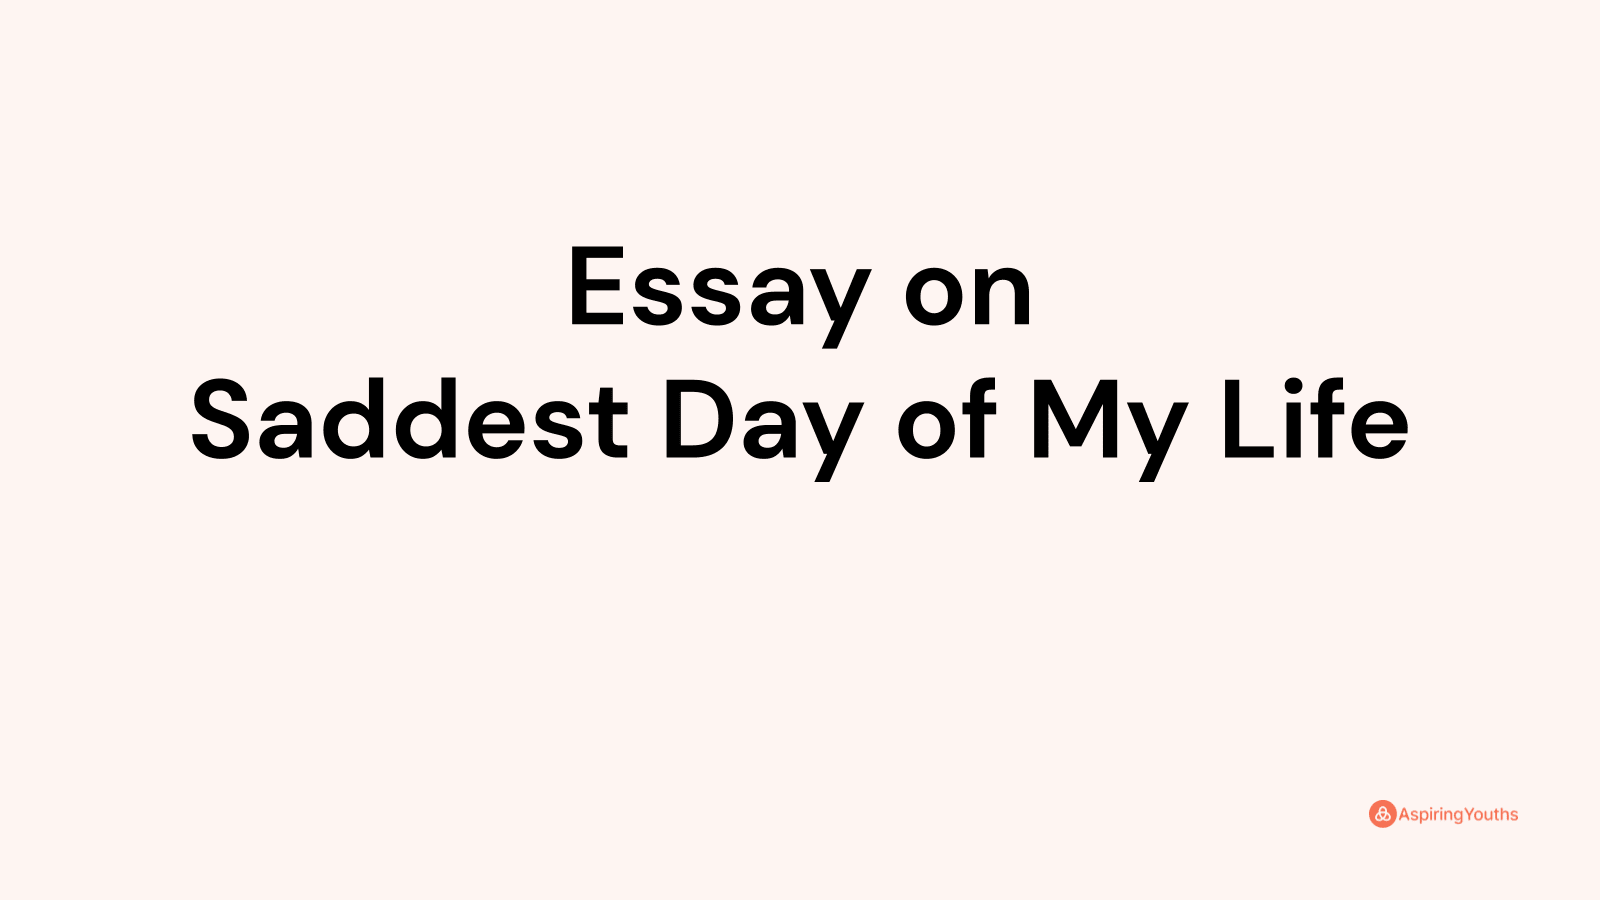 write an essay on the saddest day of my life